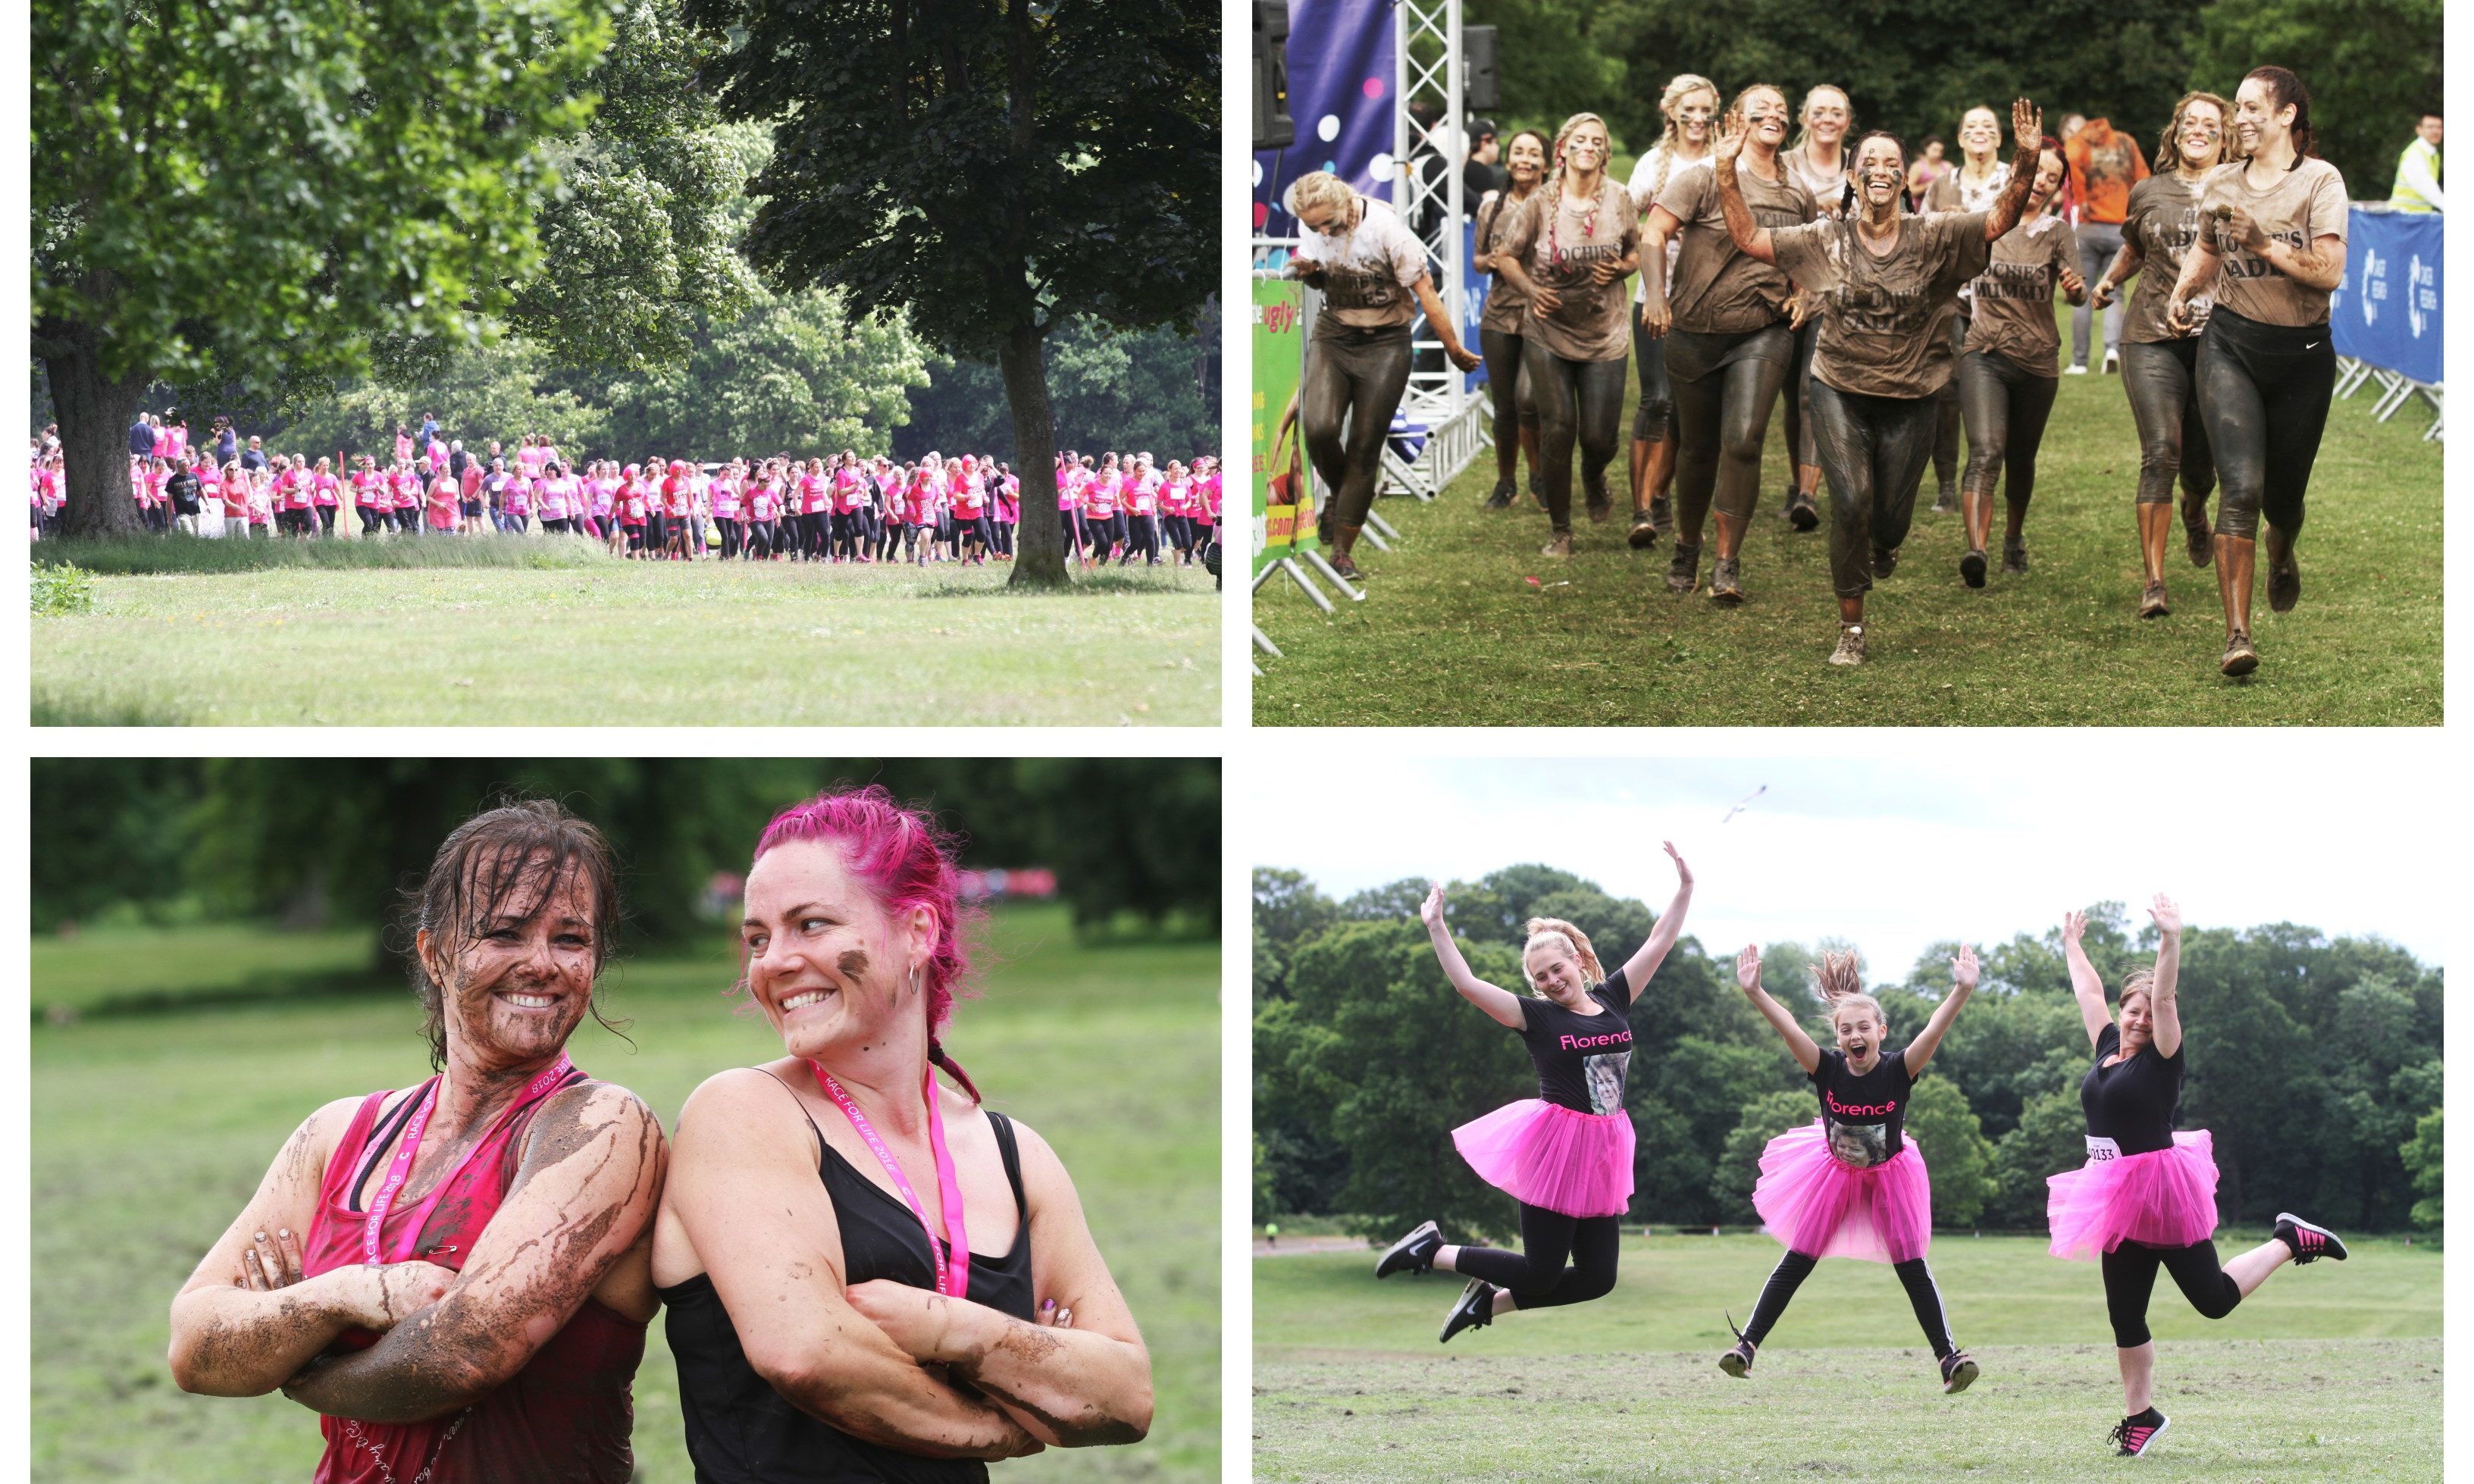 The Race for Life/Pretty Muddy events were held at Camperdown Park